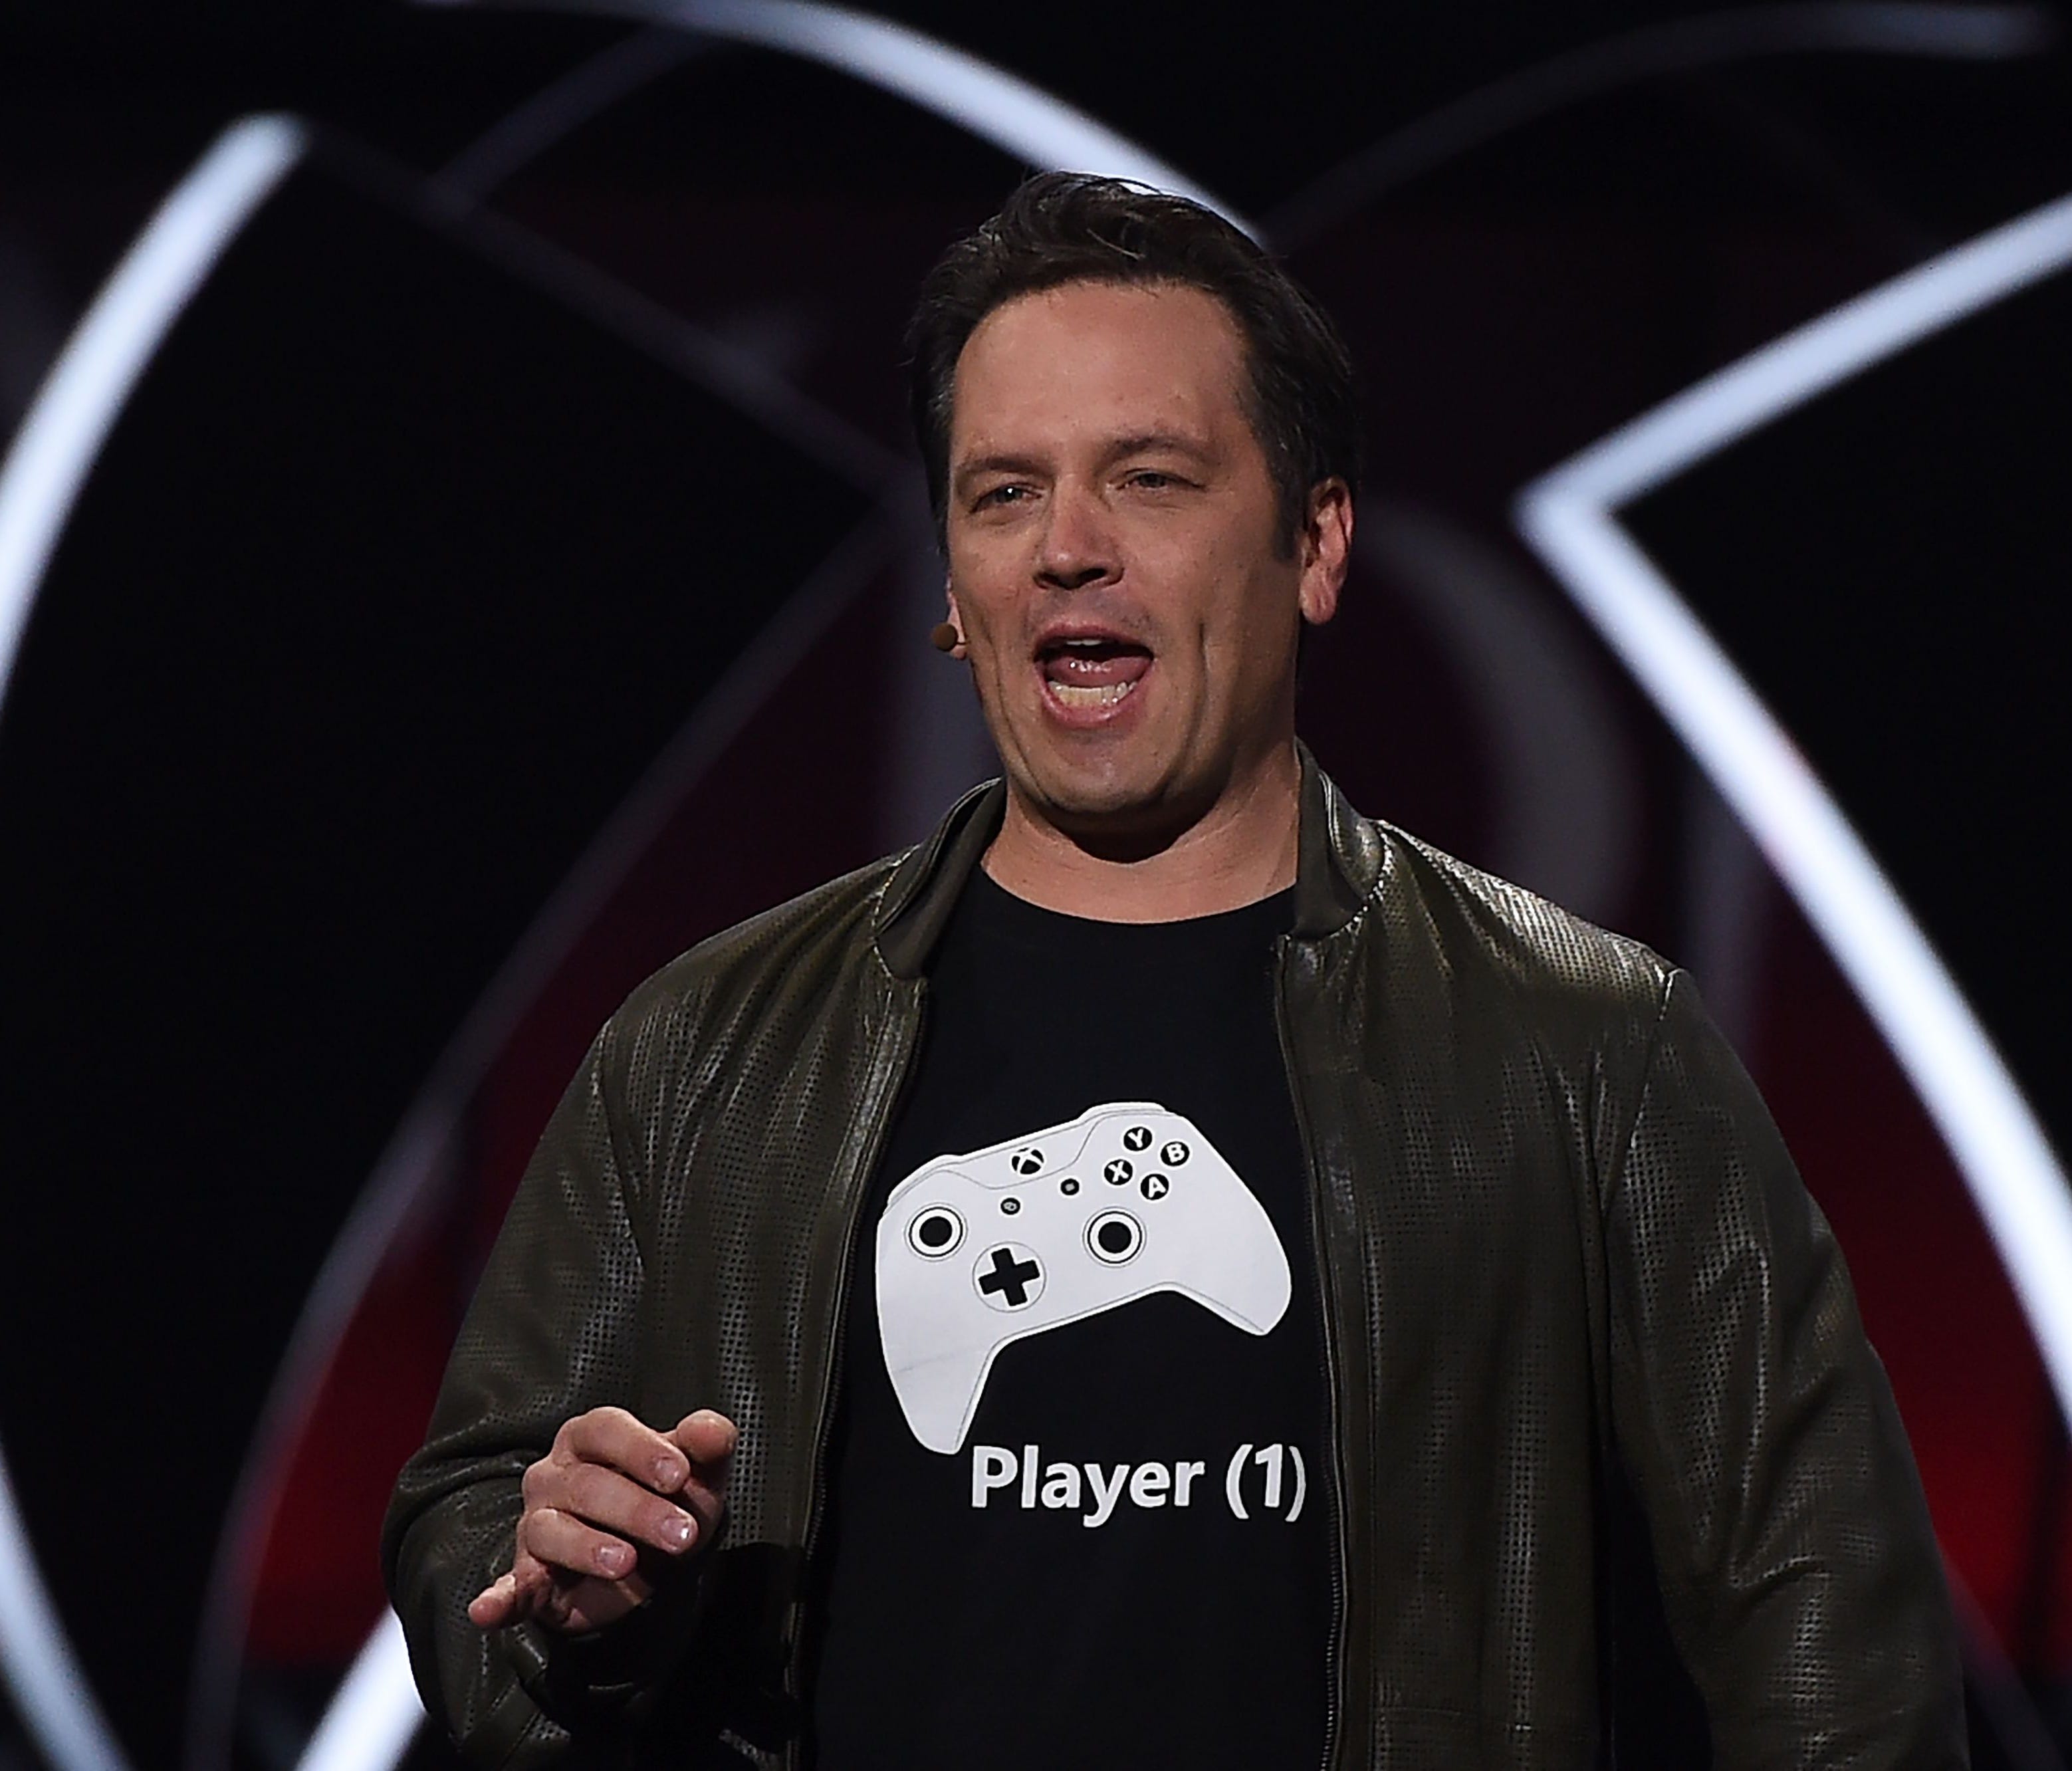 Xbox chief Phil Spencer speaks on stage at the Microsoft Xbox E3 2017 Briefing at the Galen Center in Los Angeles, Calif. The event is part of the Electronic Entertainment Expo (E3), which focuses on new products and technologies in electronic gaming